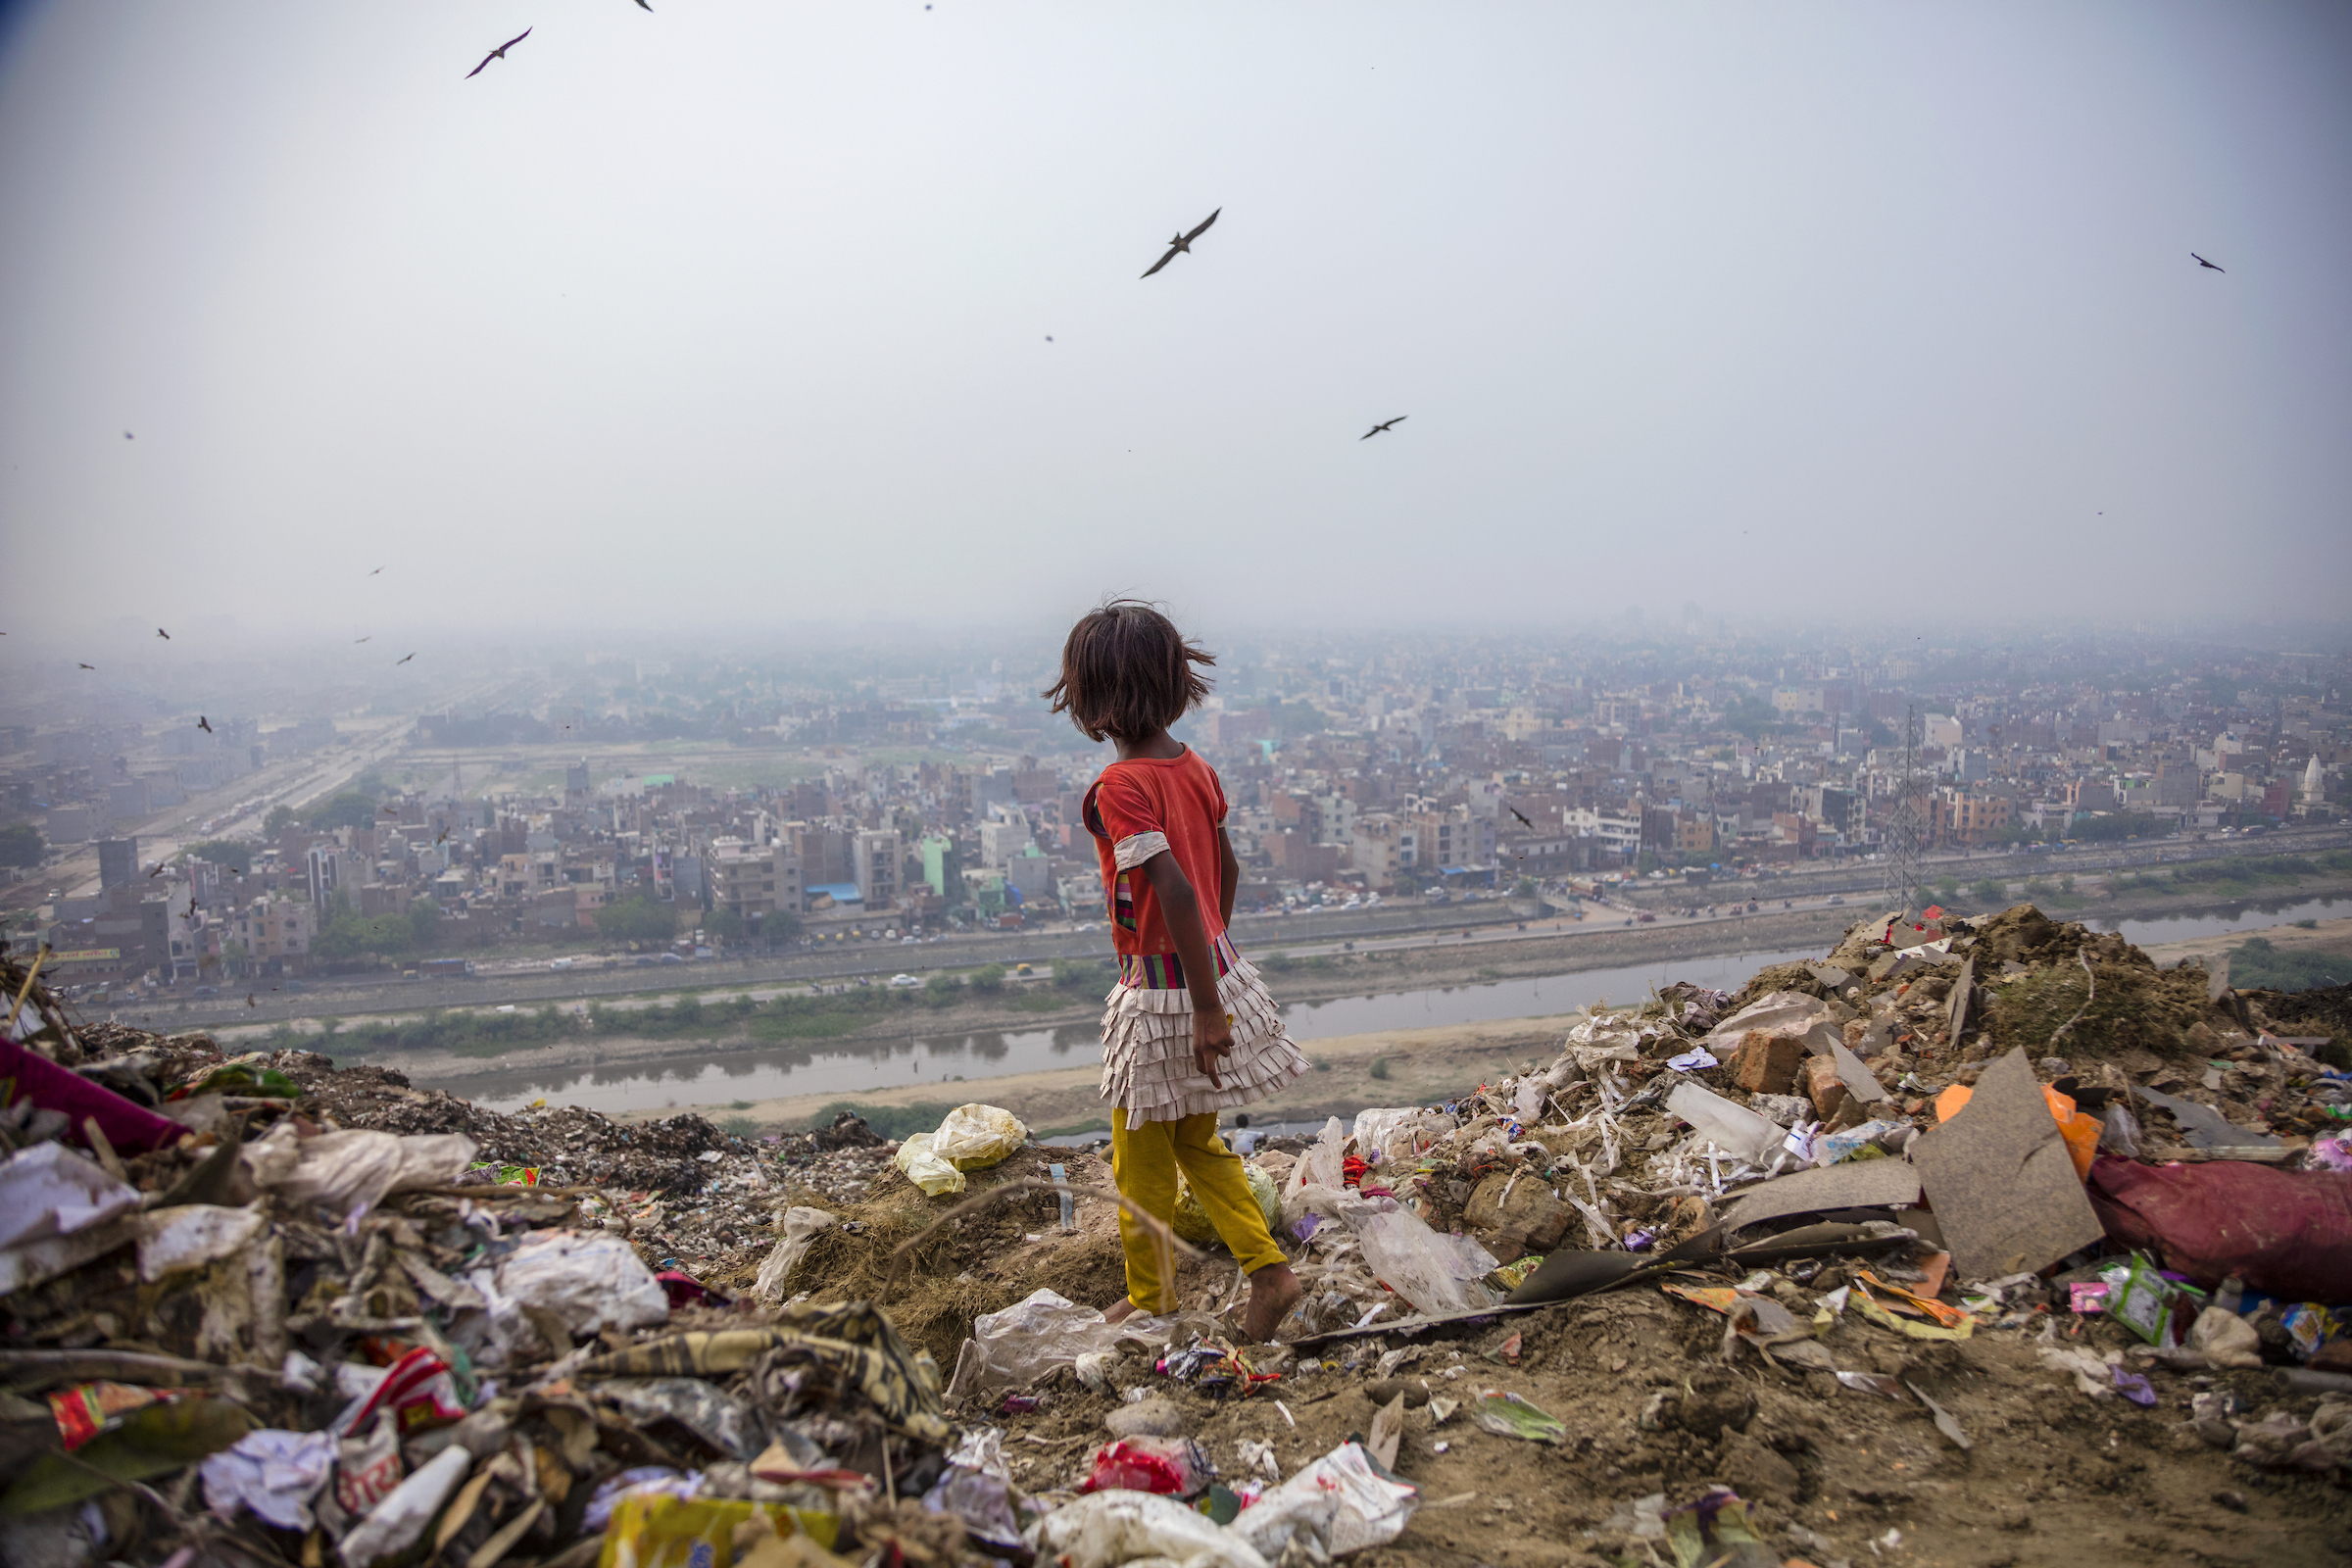 Ghazipur landfill, 70 acres of trash in Delhi, India, provides a hunting ground for 7-year-old Zarina, who salvages items to sell.